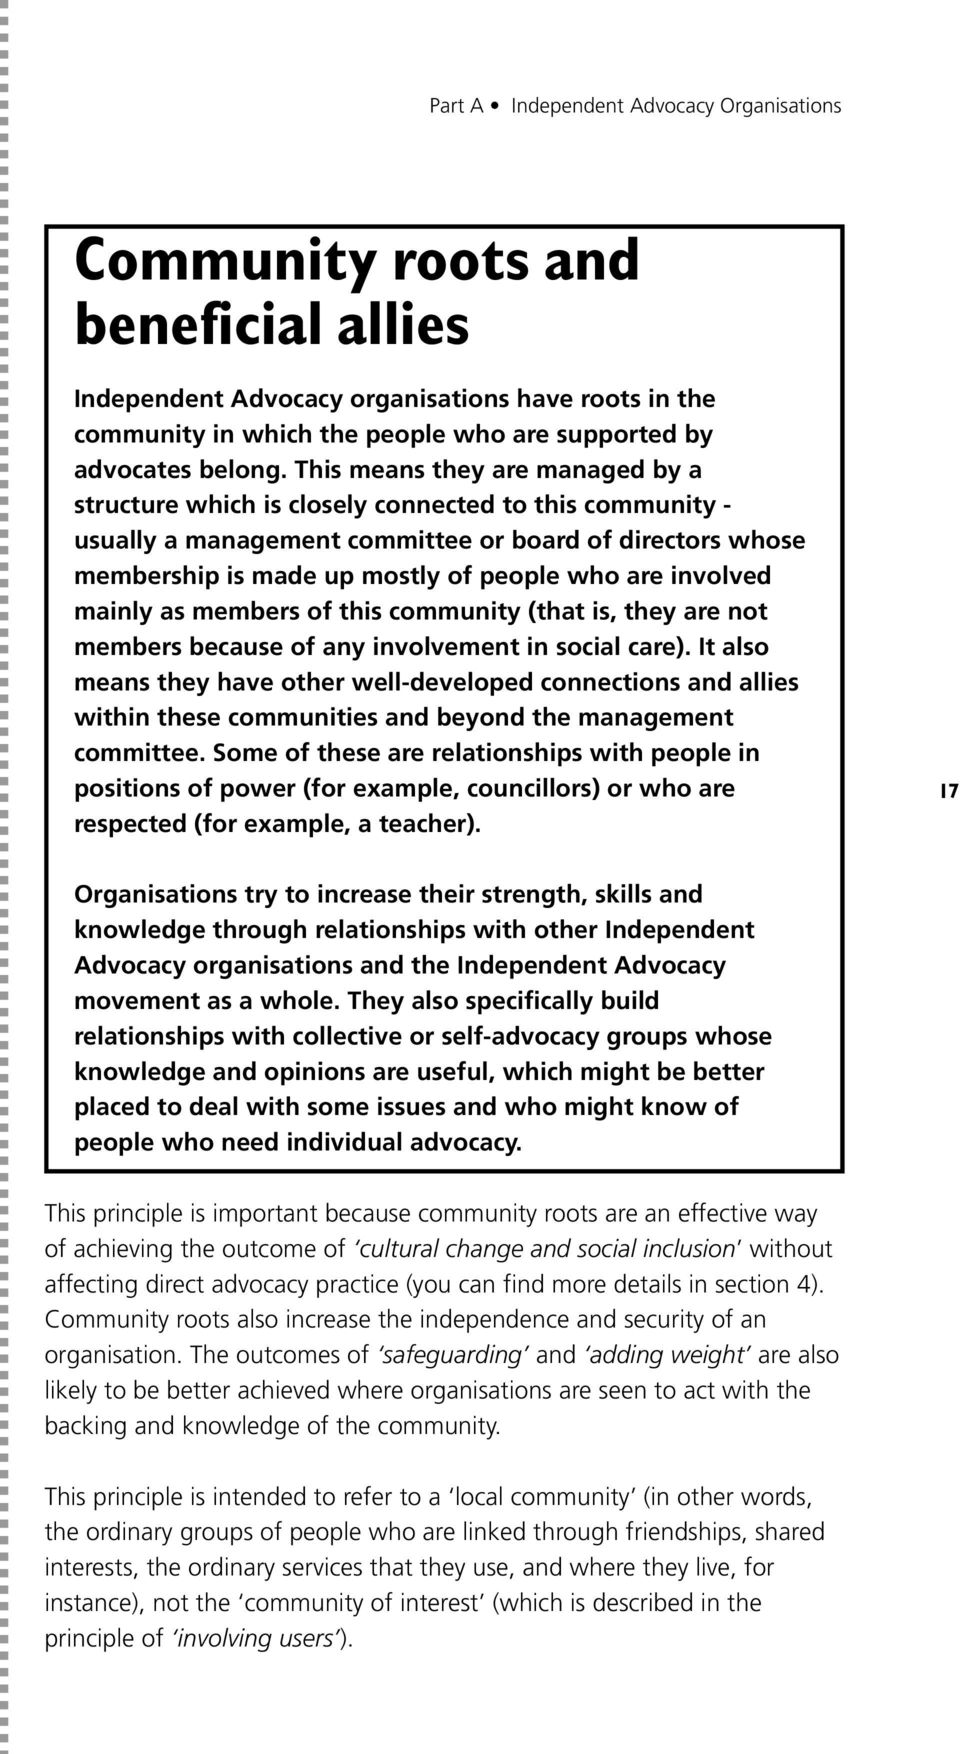 This means they are managed by a structure which is closely connected to this community - usually a management committee or board of directors whose membership is made up mostly of people who are